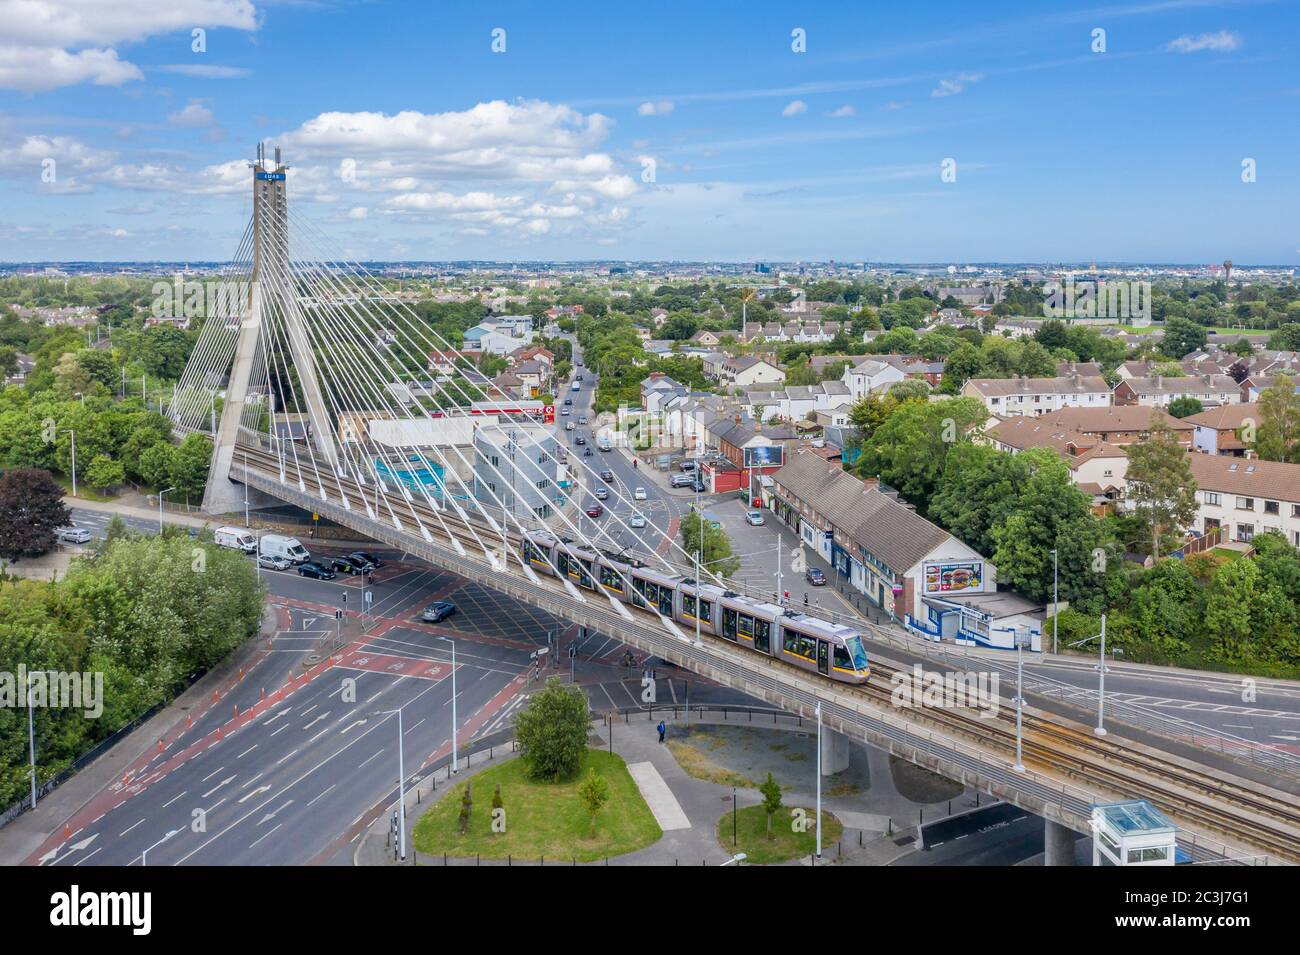 William Dargan Bridge is a cable-stayed bridge in Dundrum, Dublin in Ireland. It carries the LUAS light rail line across a busy road junction. Stock Photo